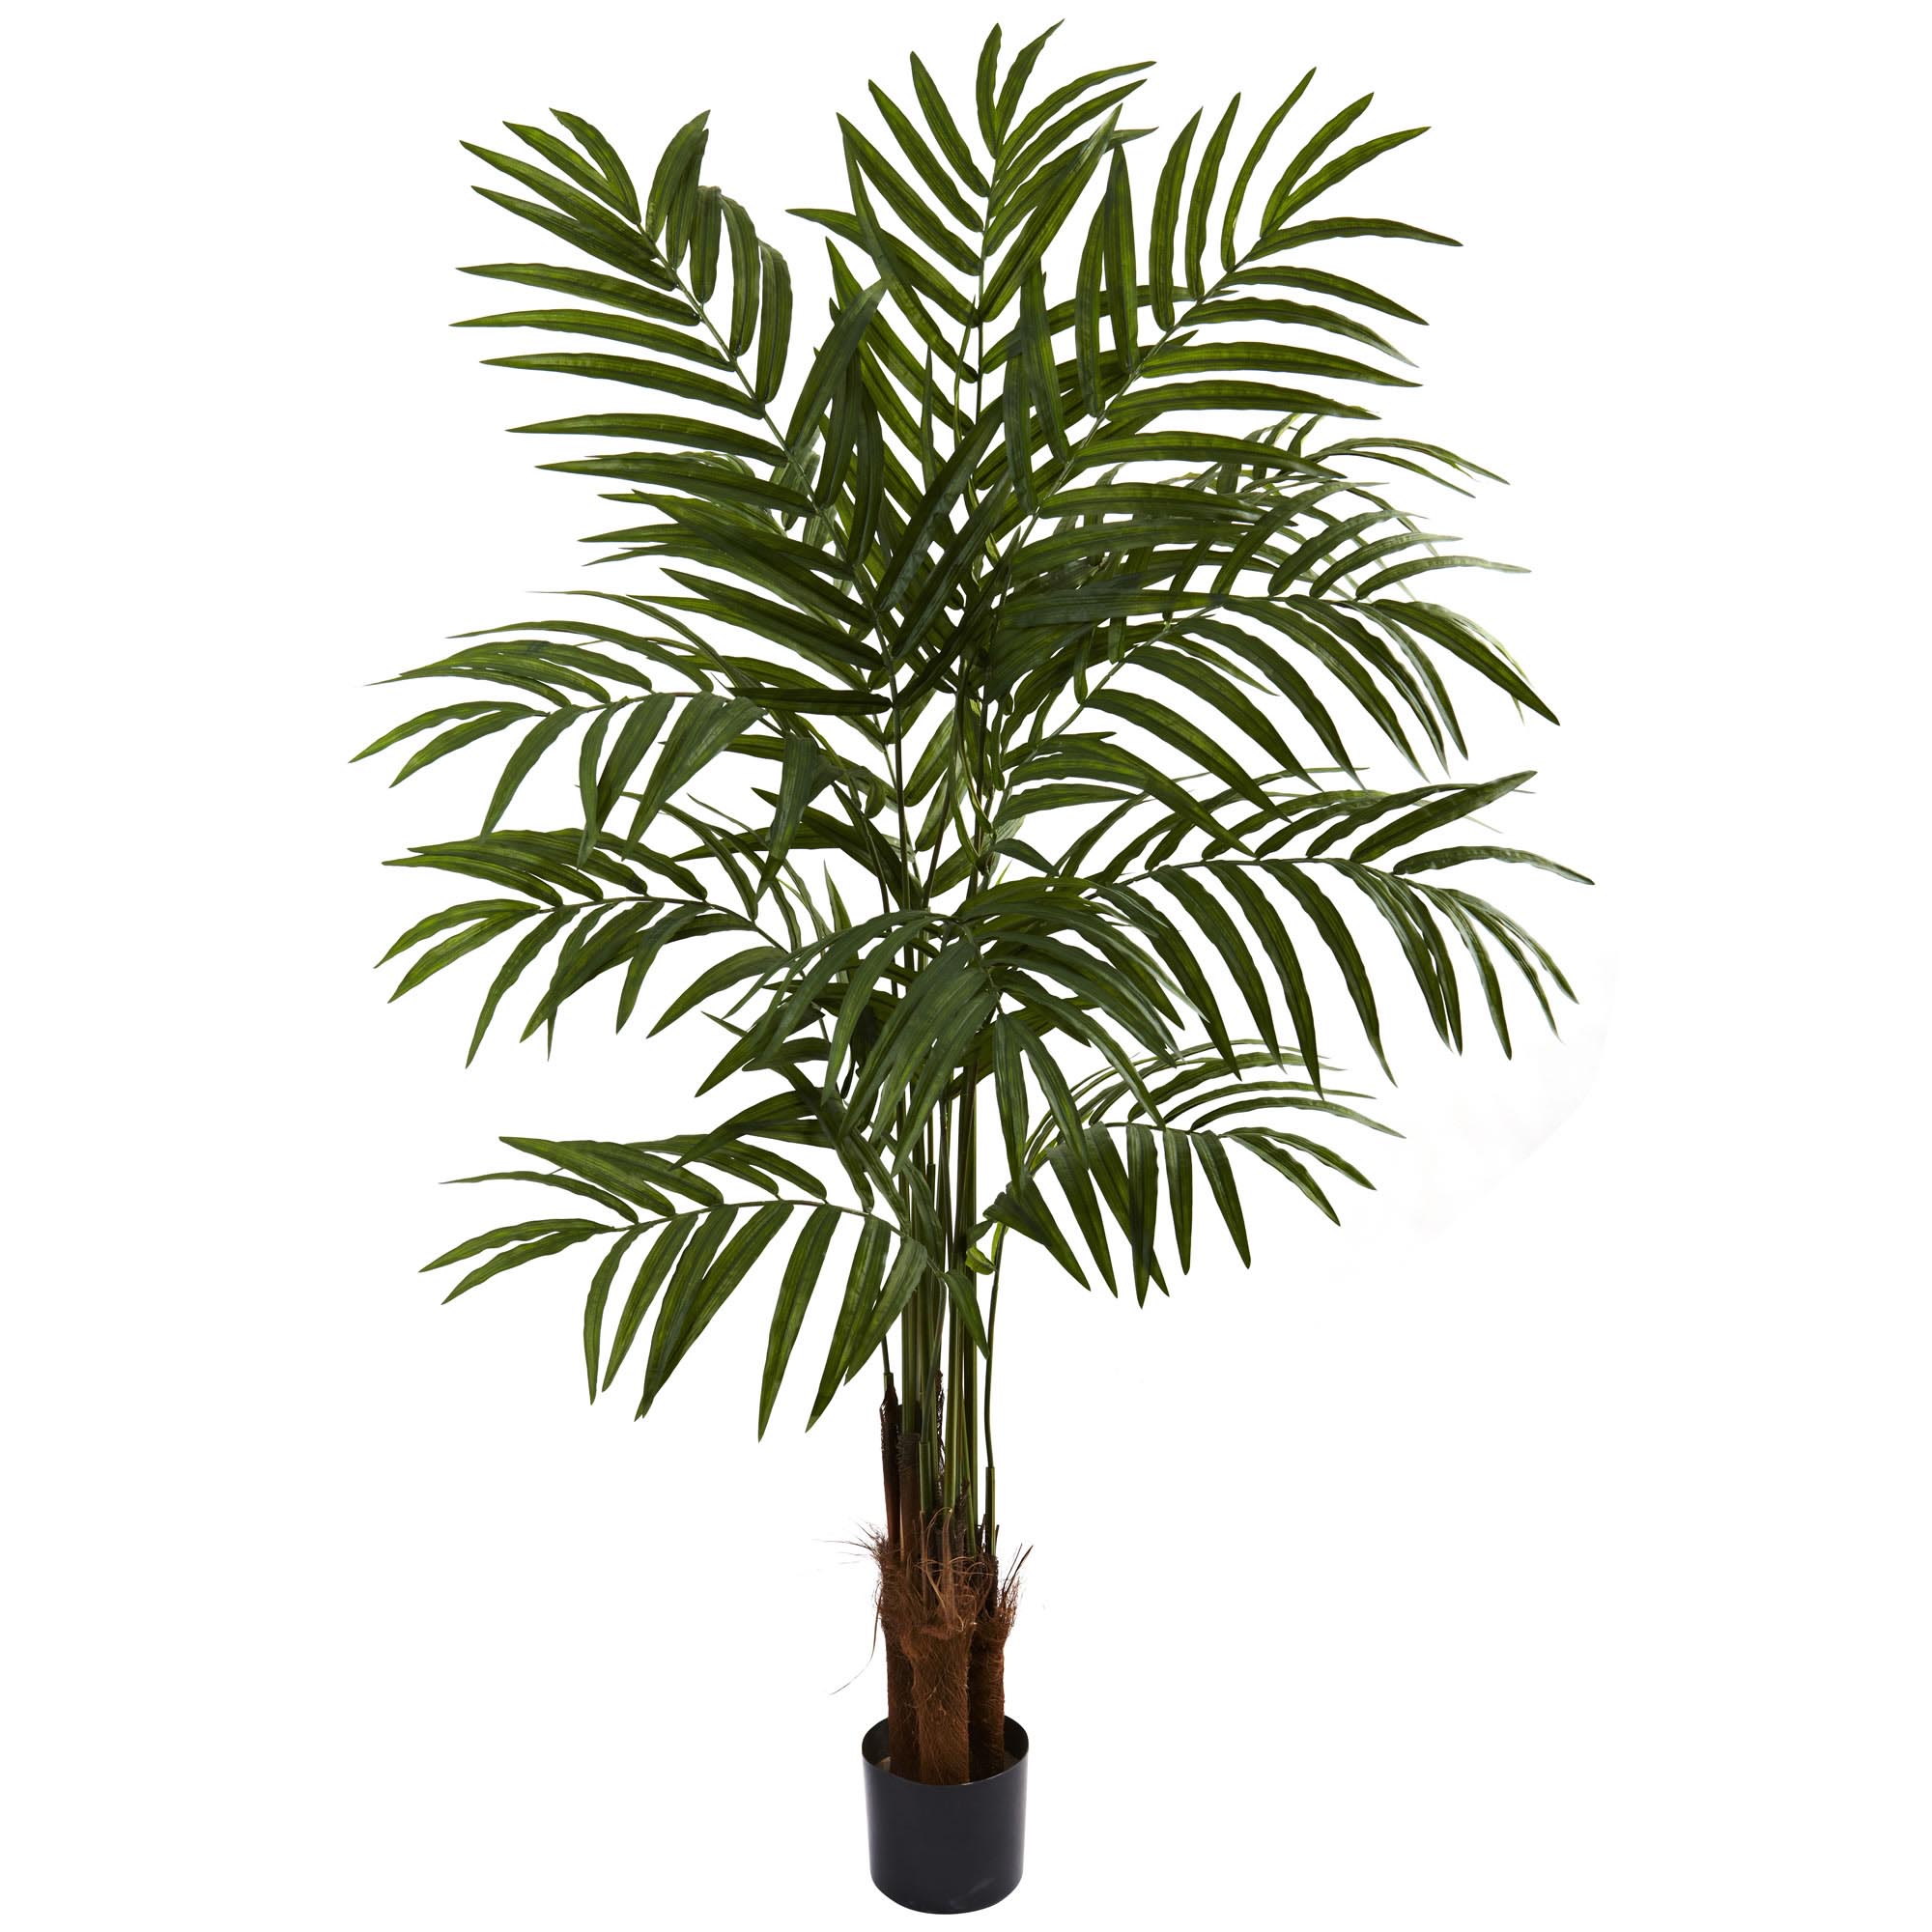 5 Foot Artificial Big Palm Tree: Potted